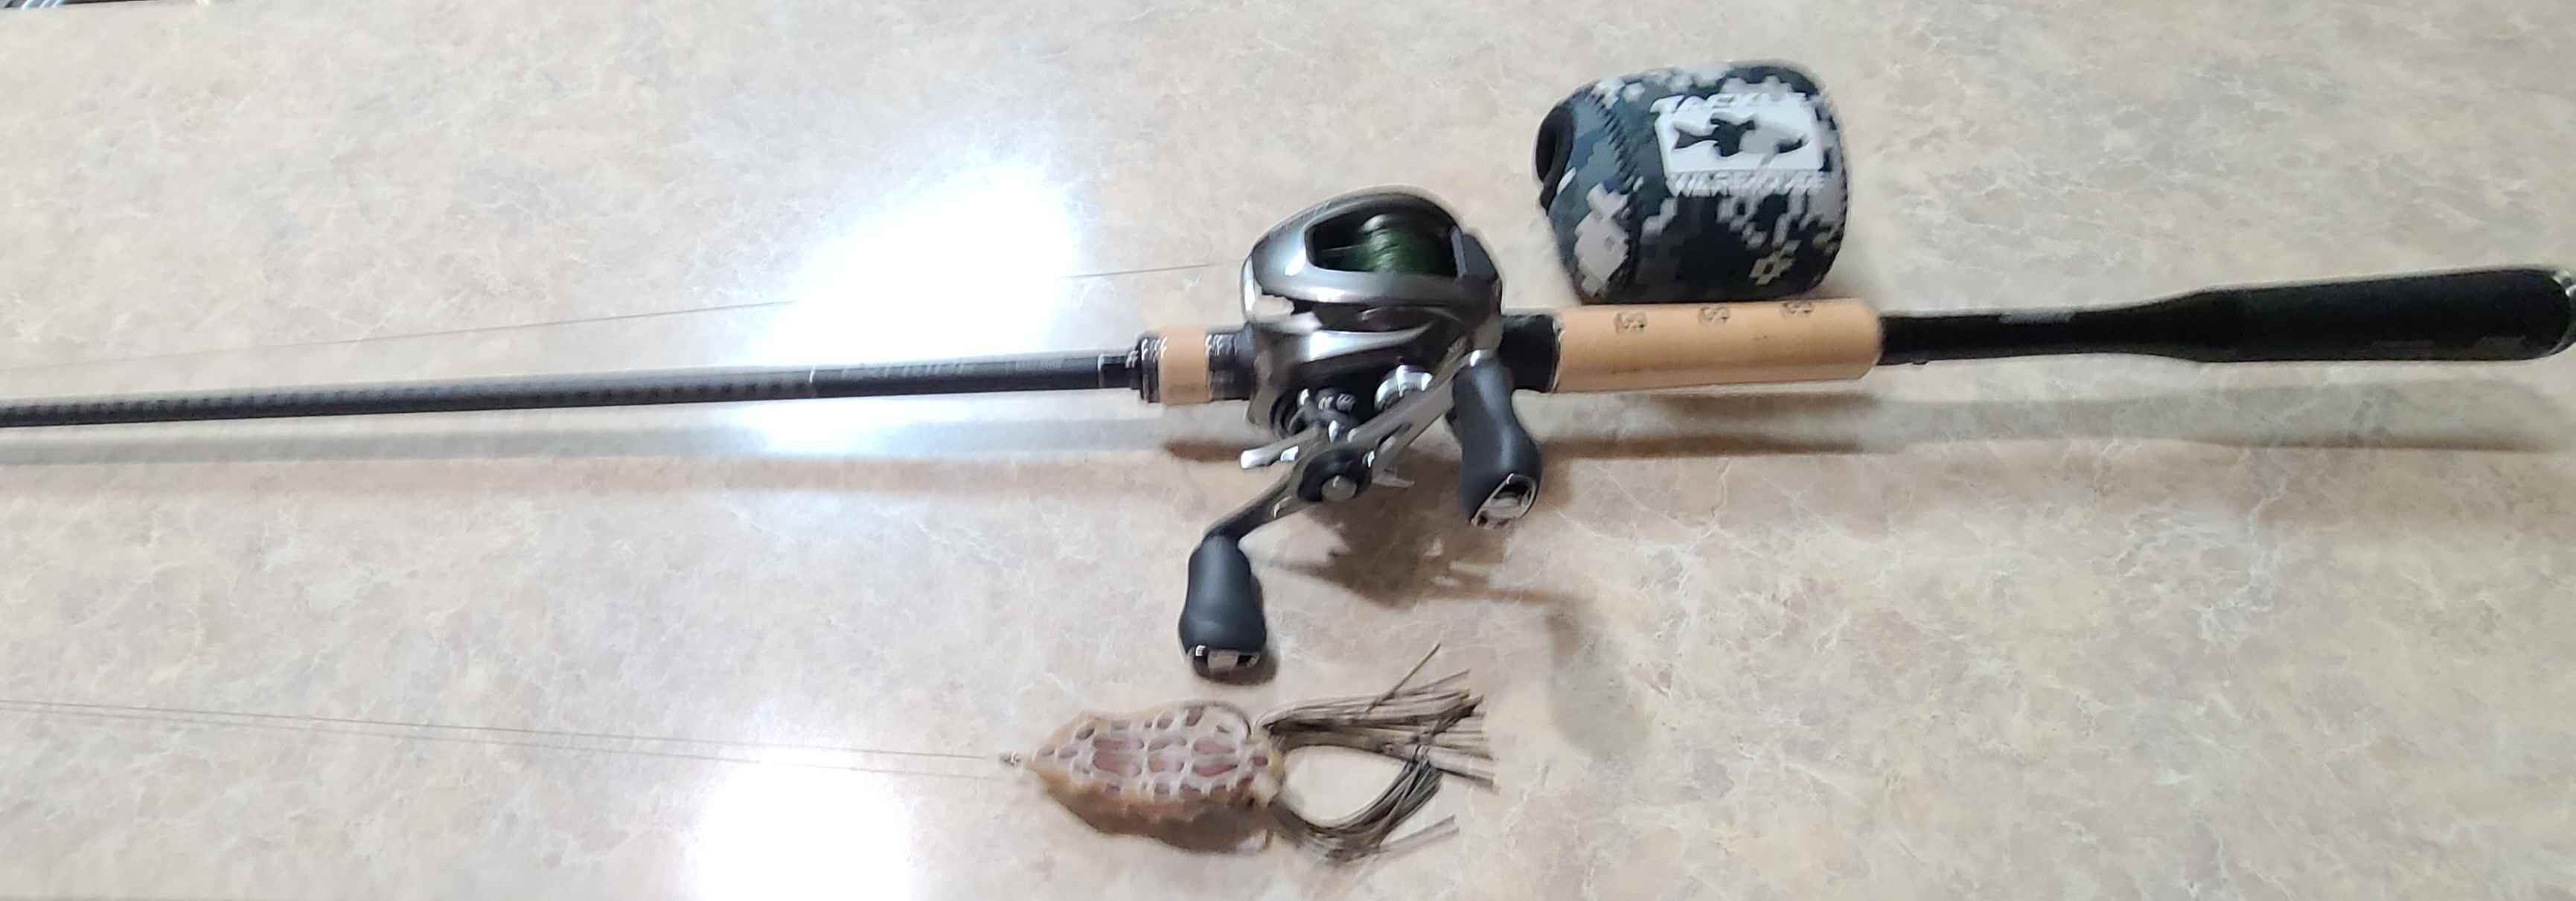 The Frog Fishing Thread - Page 2 - Fishing Rods, Reels, Line, and Knots -  Bass Fishing Forums